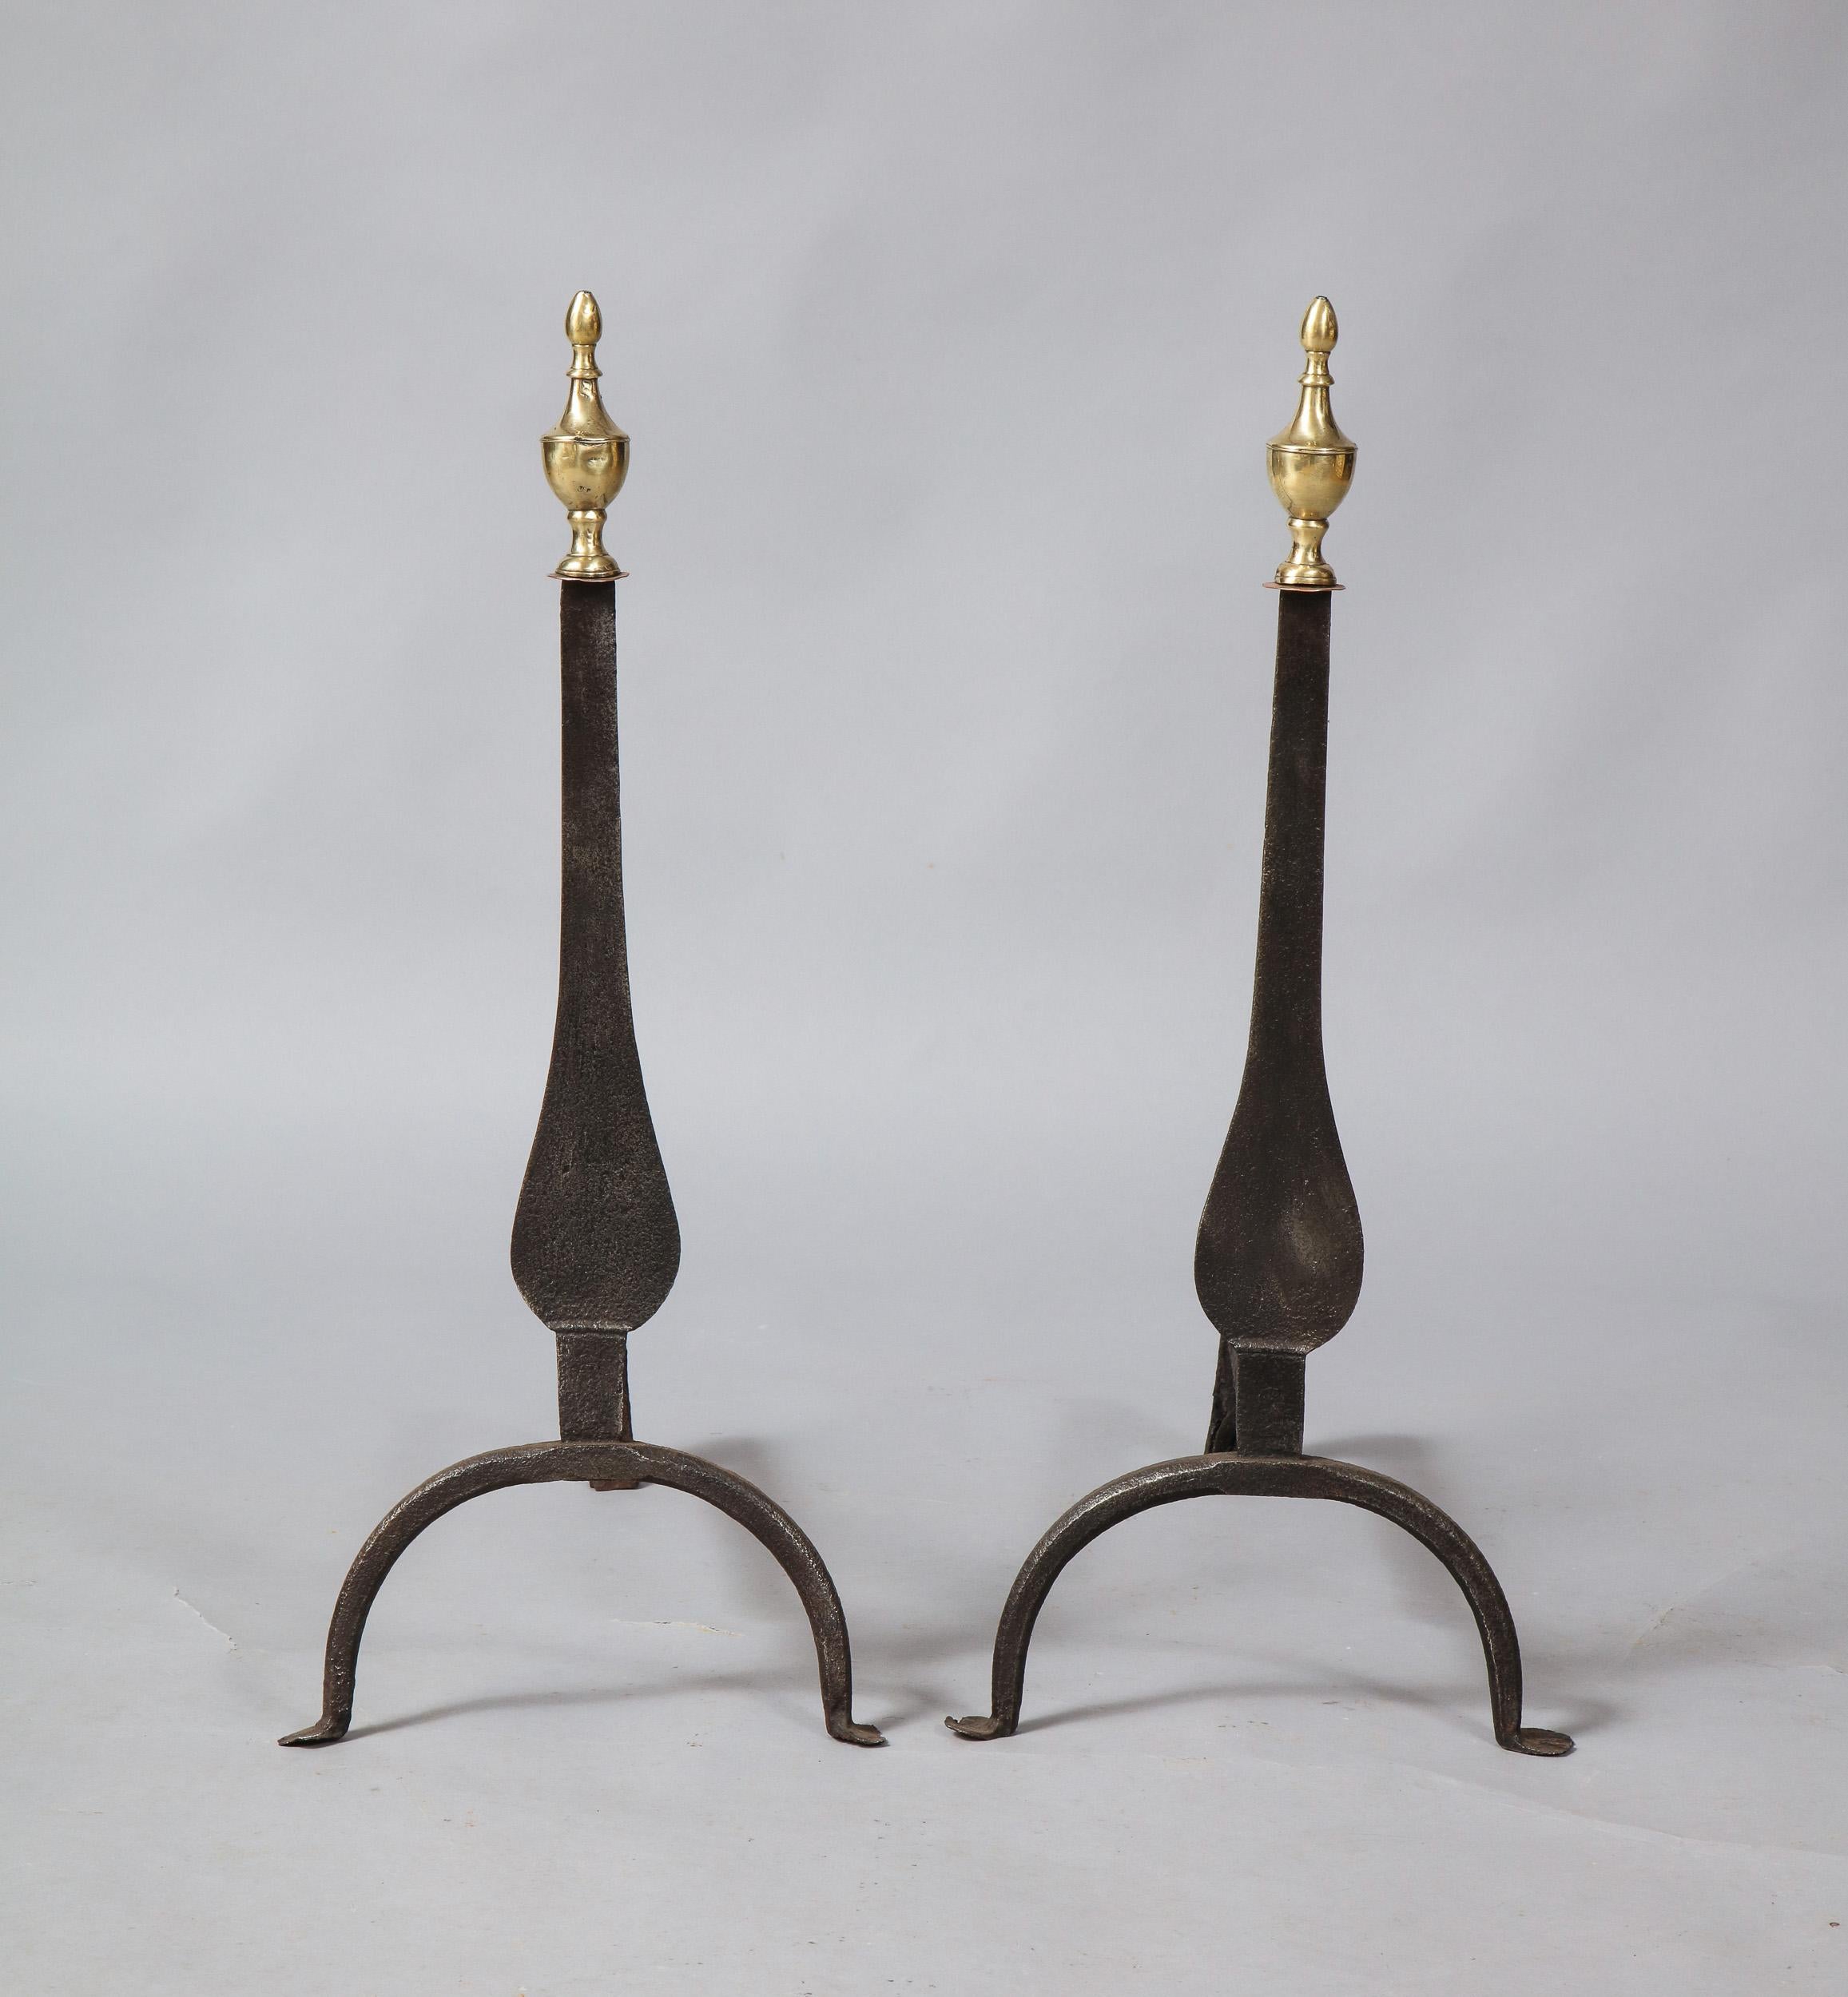 Fine pair of early 19th century 